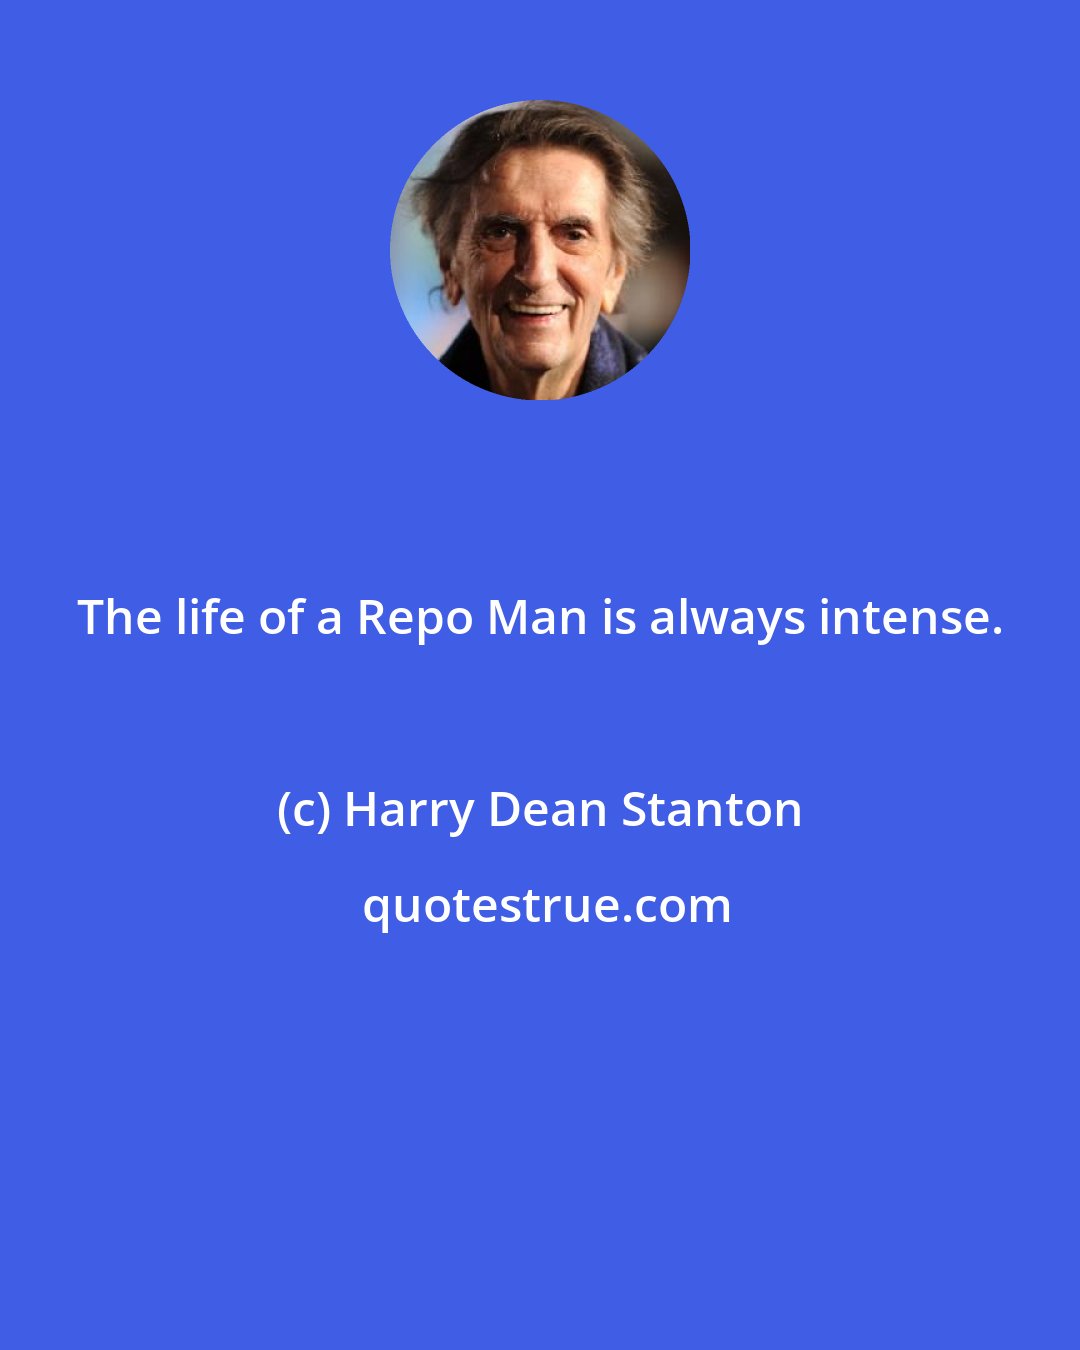 Harry Dean Stanton: The life of a Repo Man is always intense.